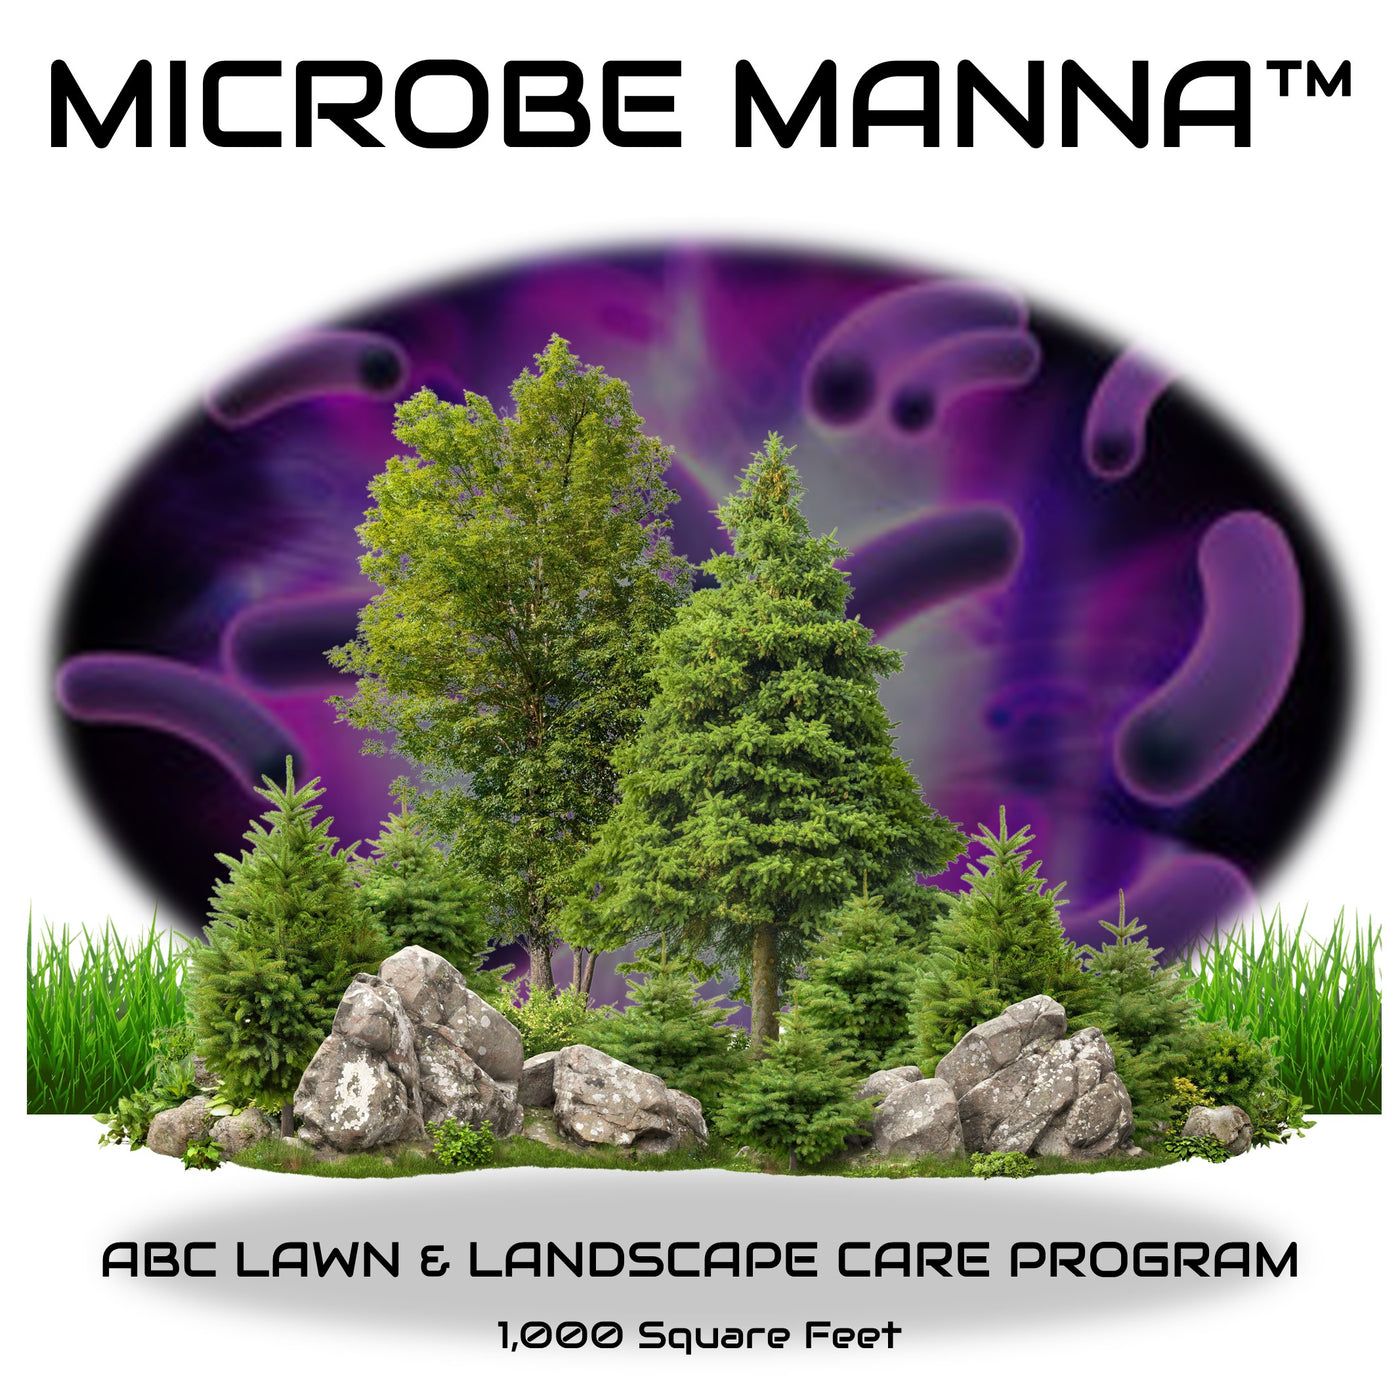 Microbe Manna ABC Lawn and Landscape Care Program for 1000 Square Feet